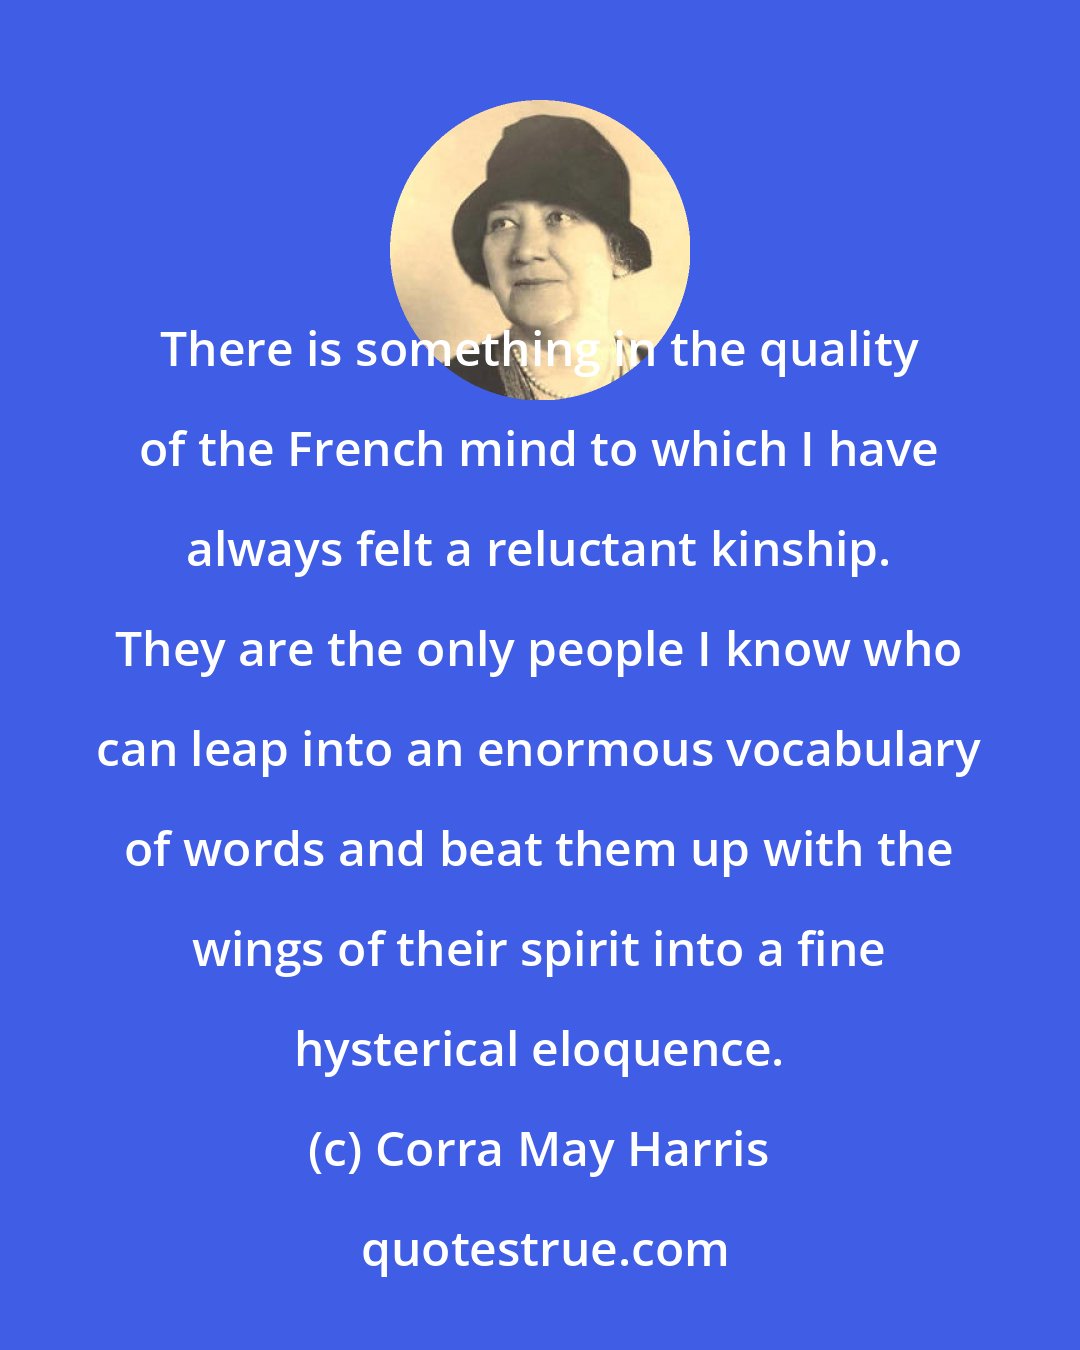 Corra May Harris: There is something in the quality of the French mind to which I have always felt a reluctant kinship. They are the only people I know who can leap into an enormous vocabulary of words and beat them up with the wings of their spirit into a fine hysterical eloquence.